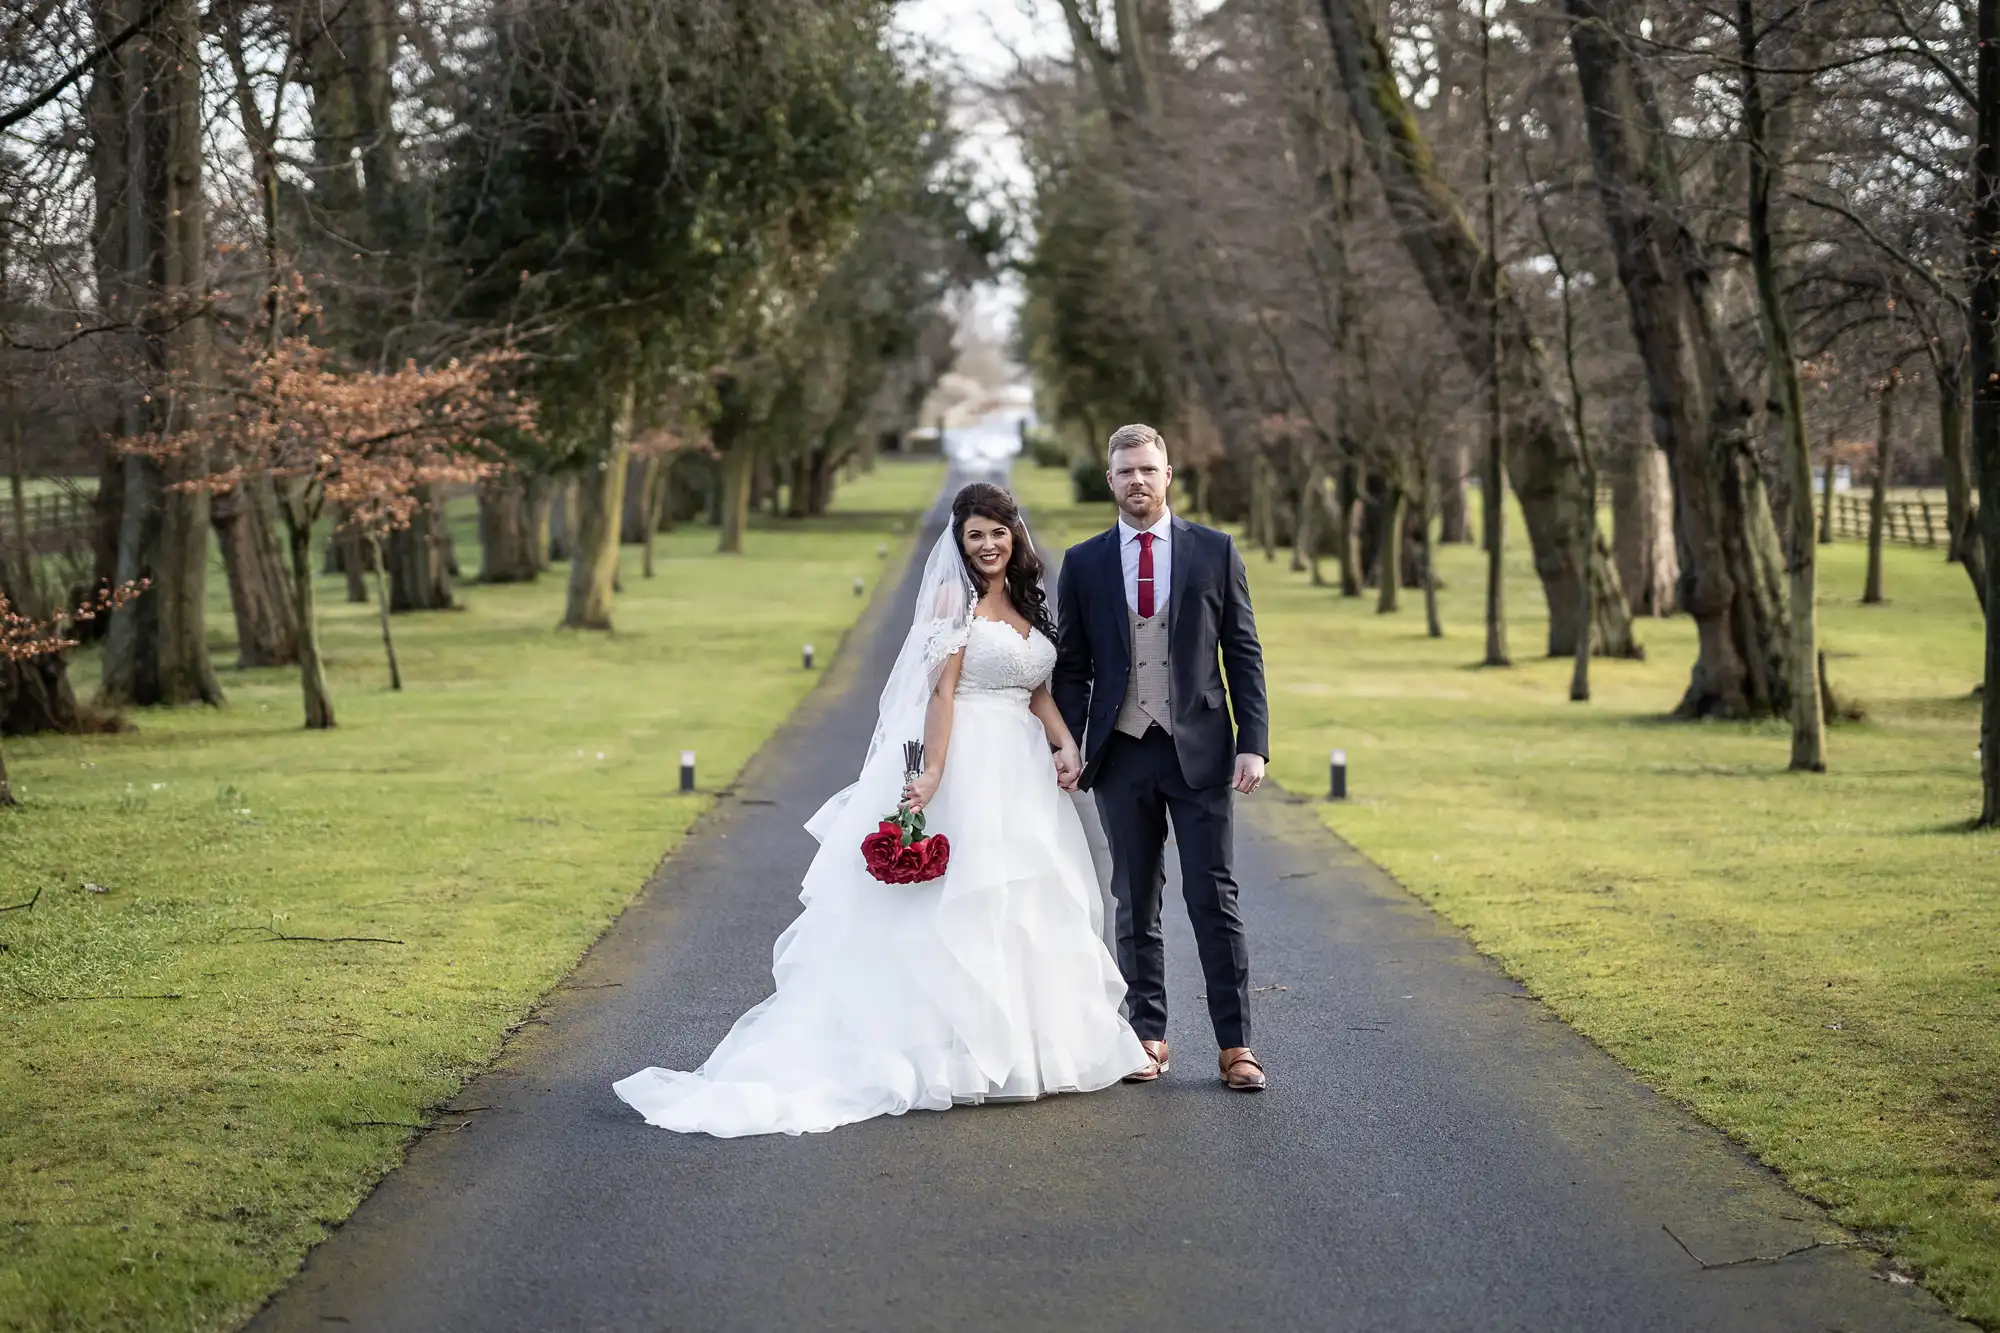 A bride and groom, dressed formally, stand hand in hand on a tree-lined pathway. The bride holds a red bouquet, and both are looking towards the camera.